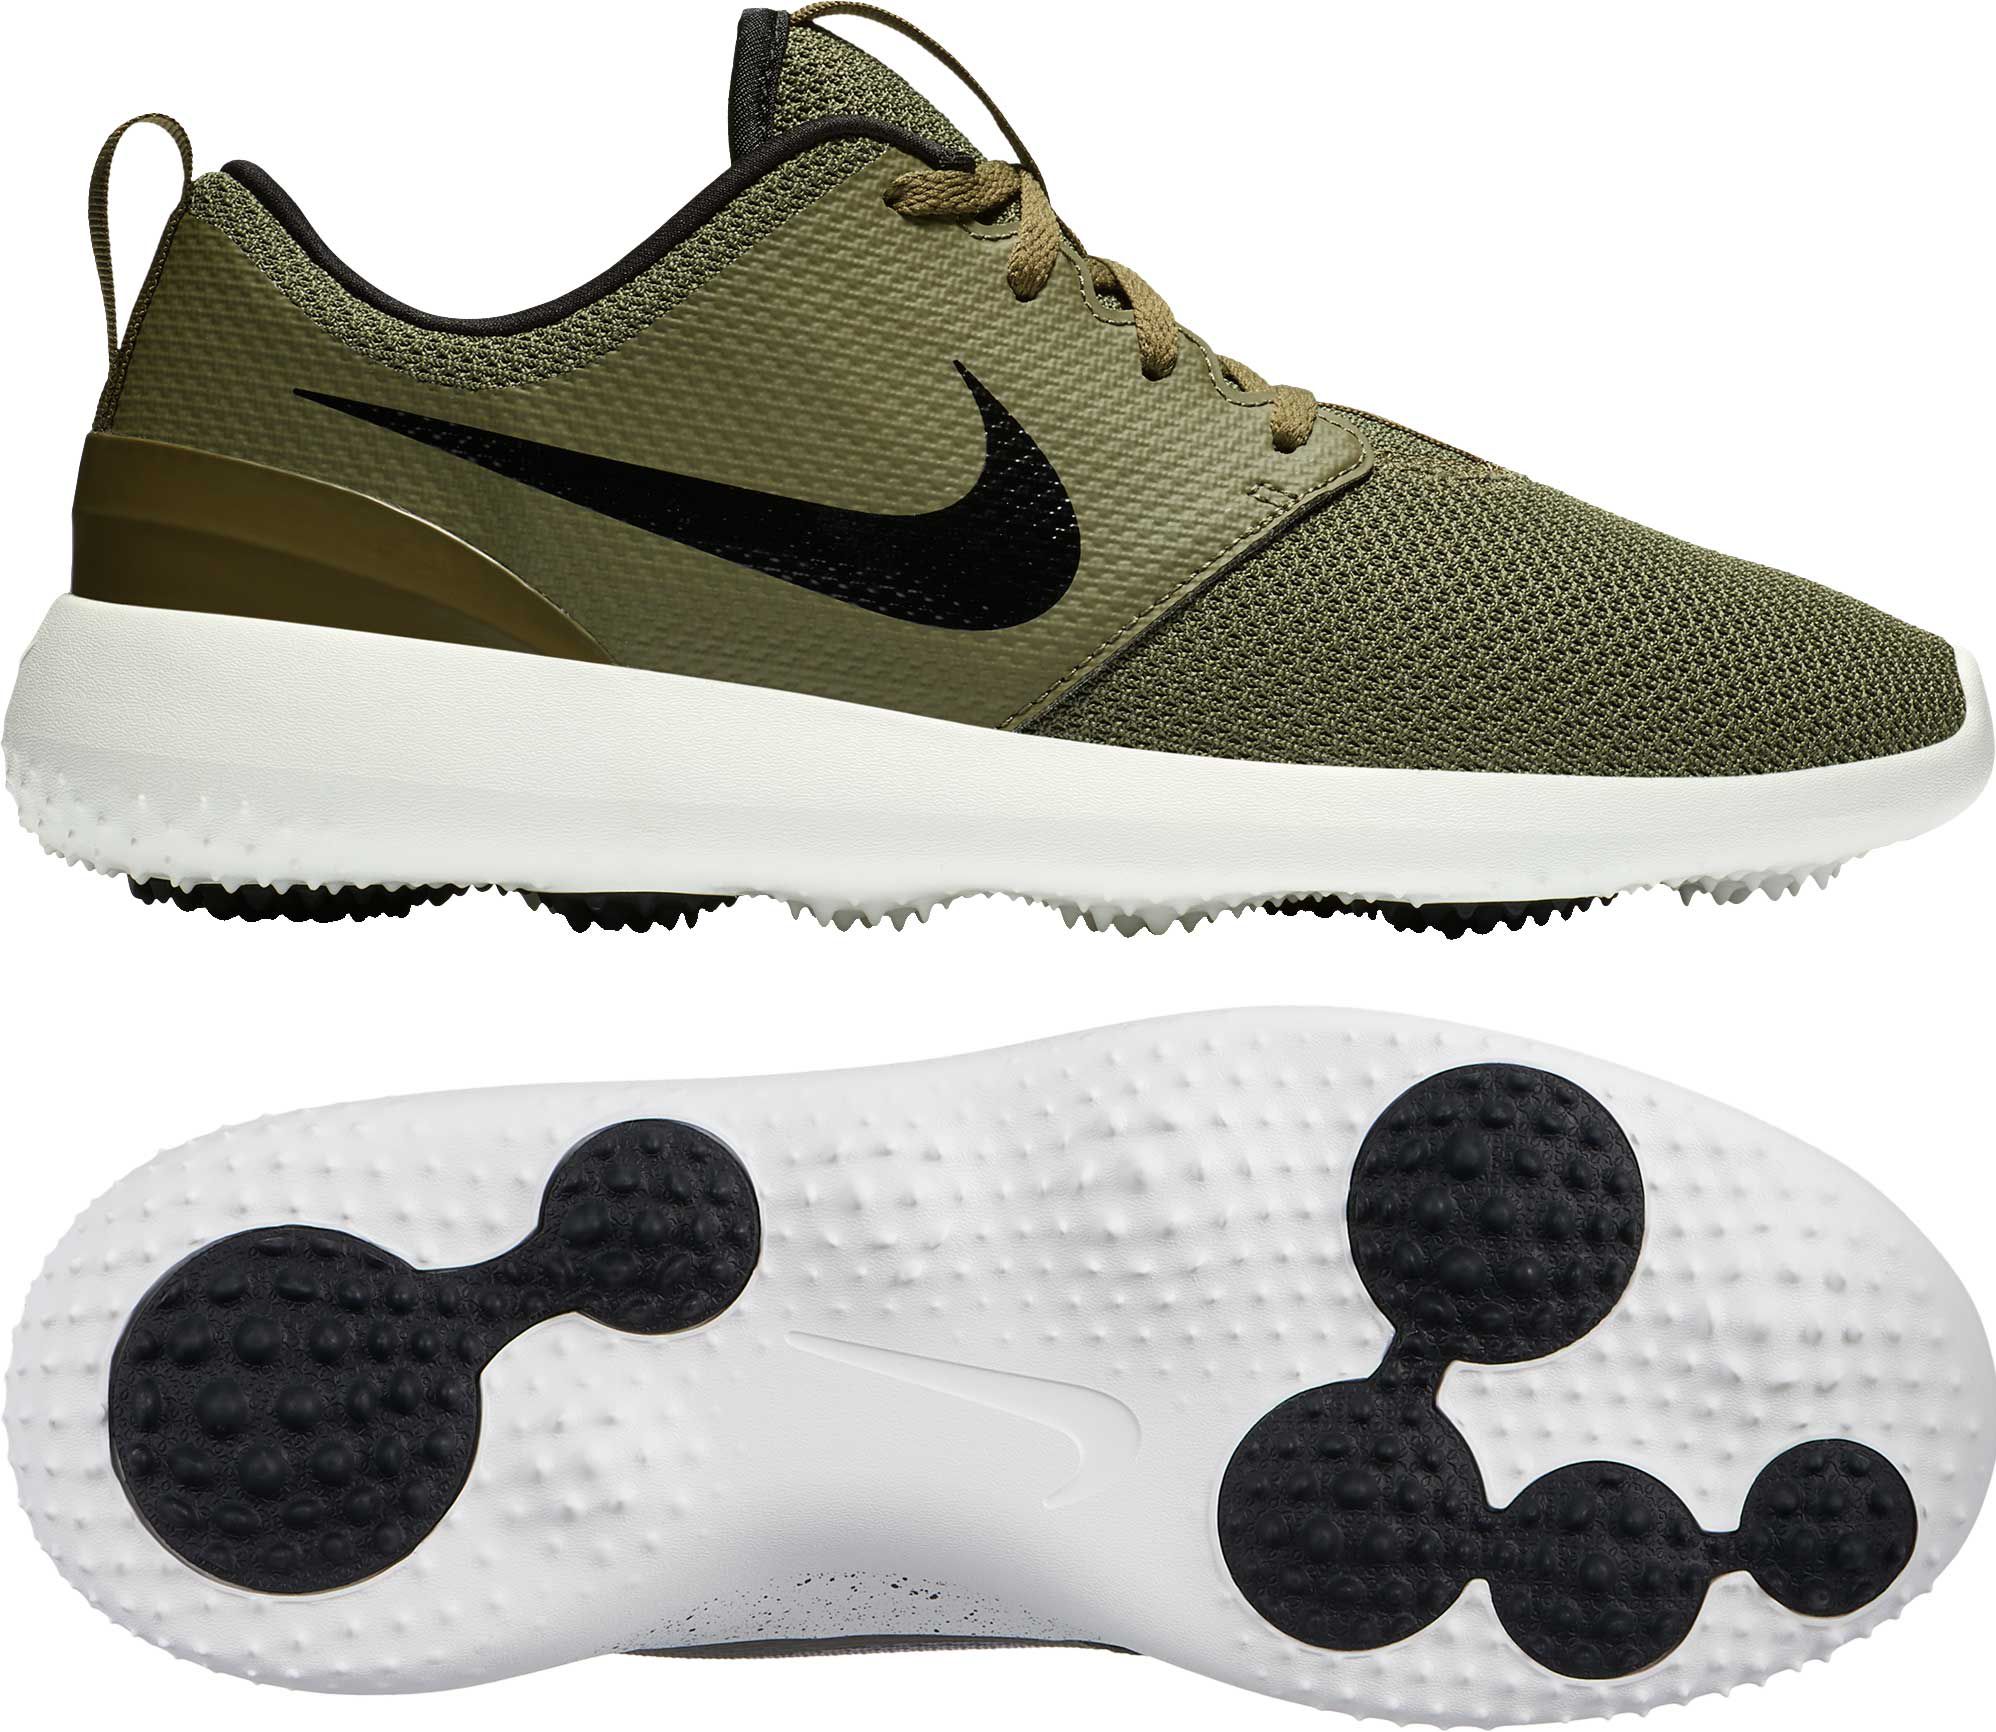 the new roshes shoes online -